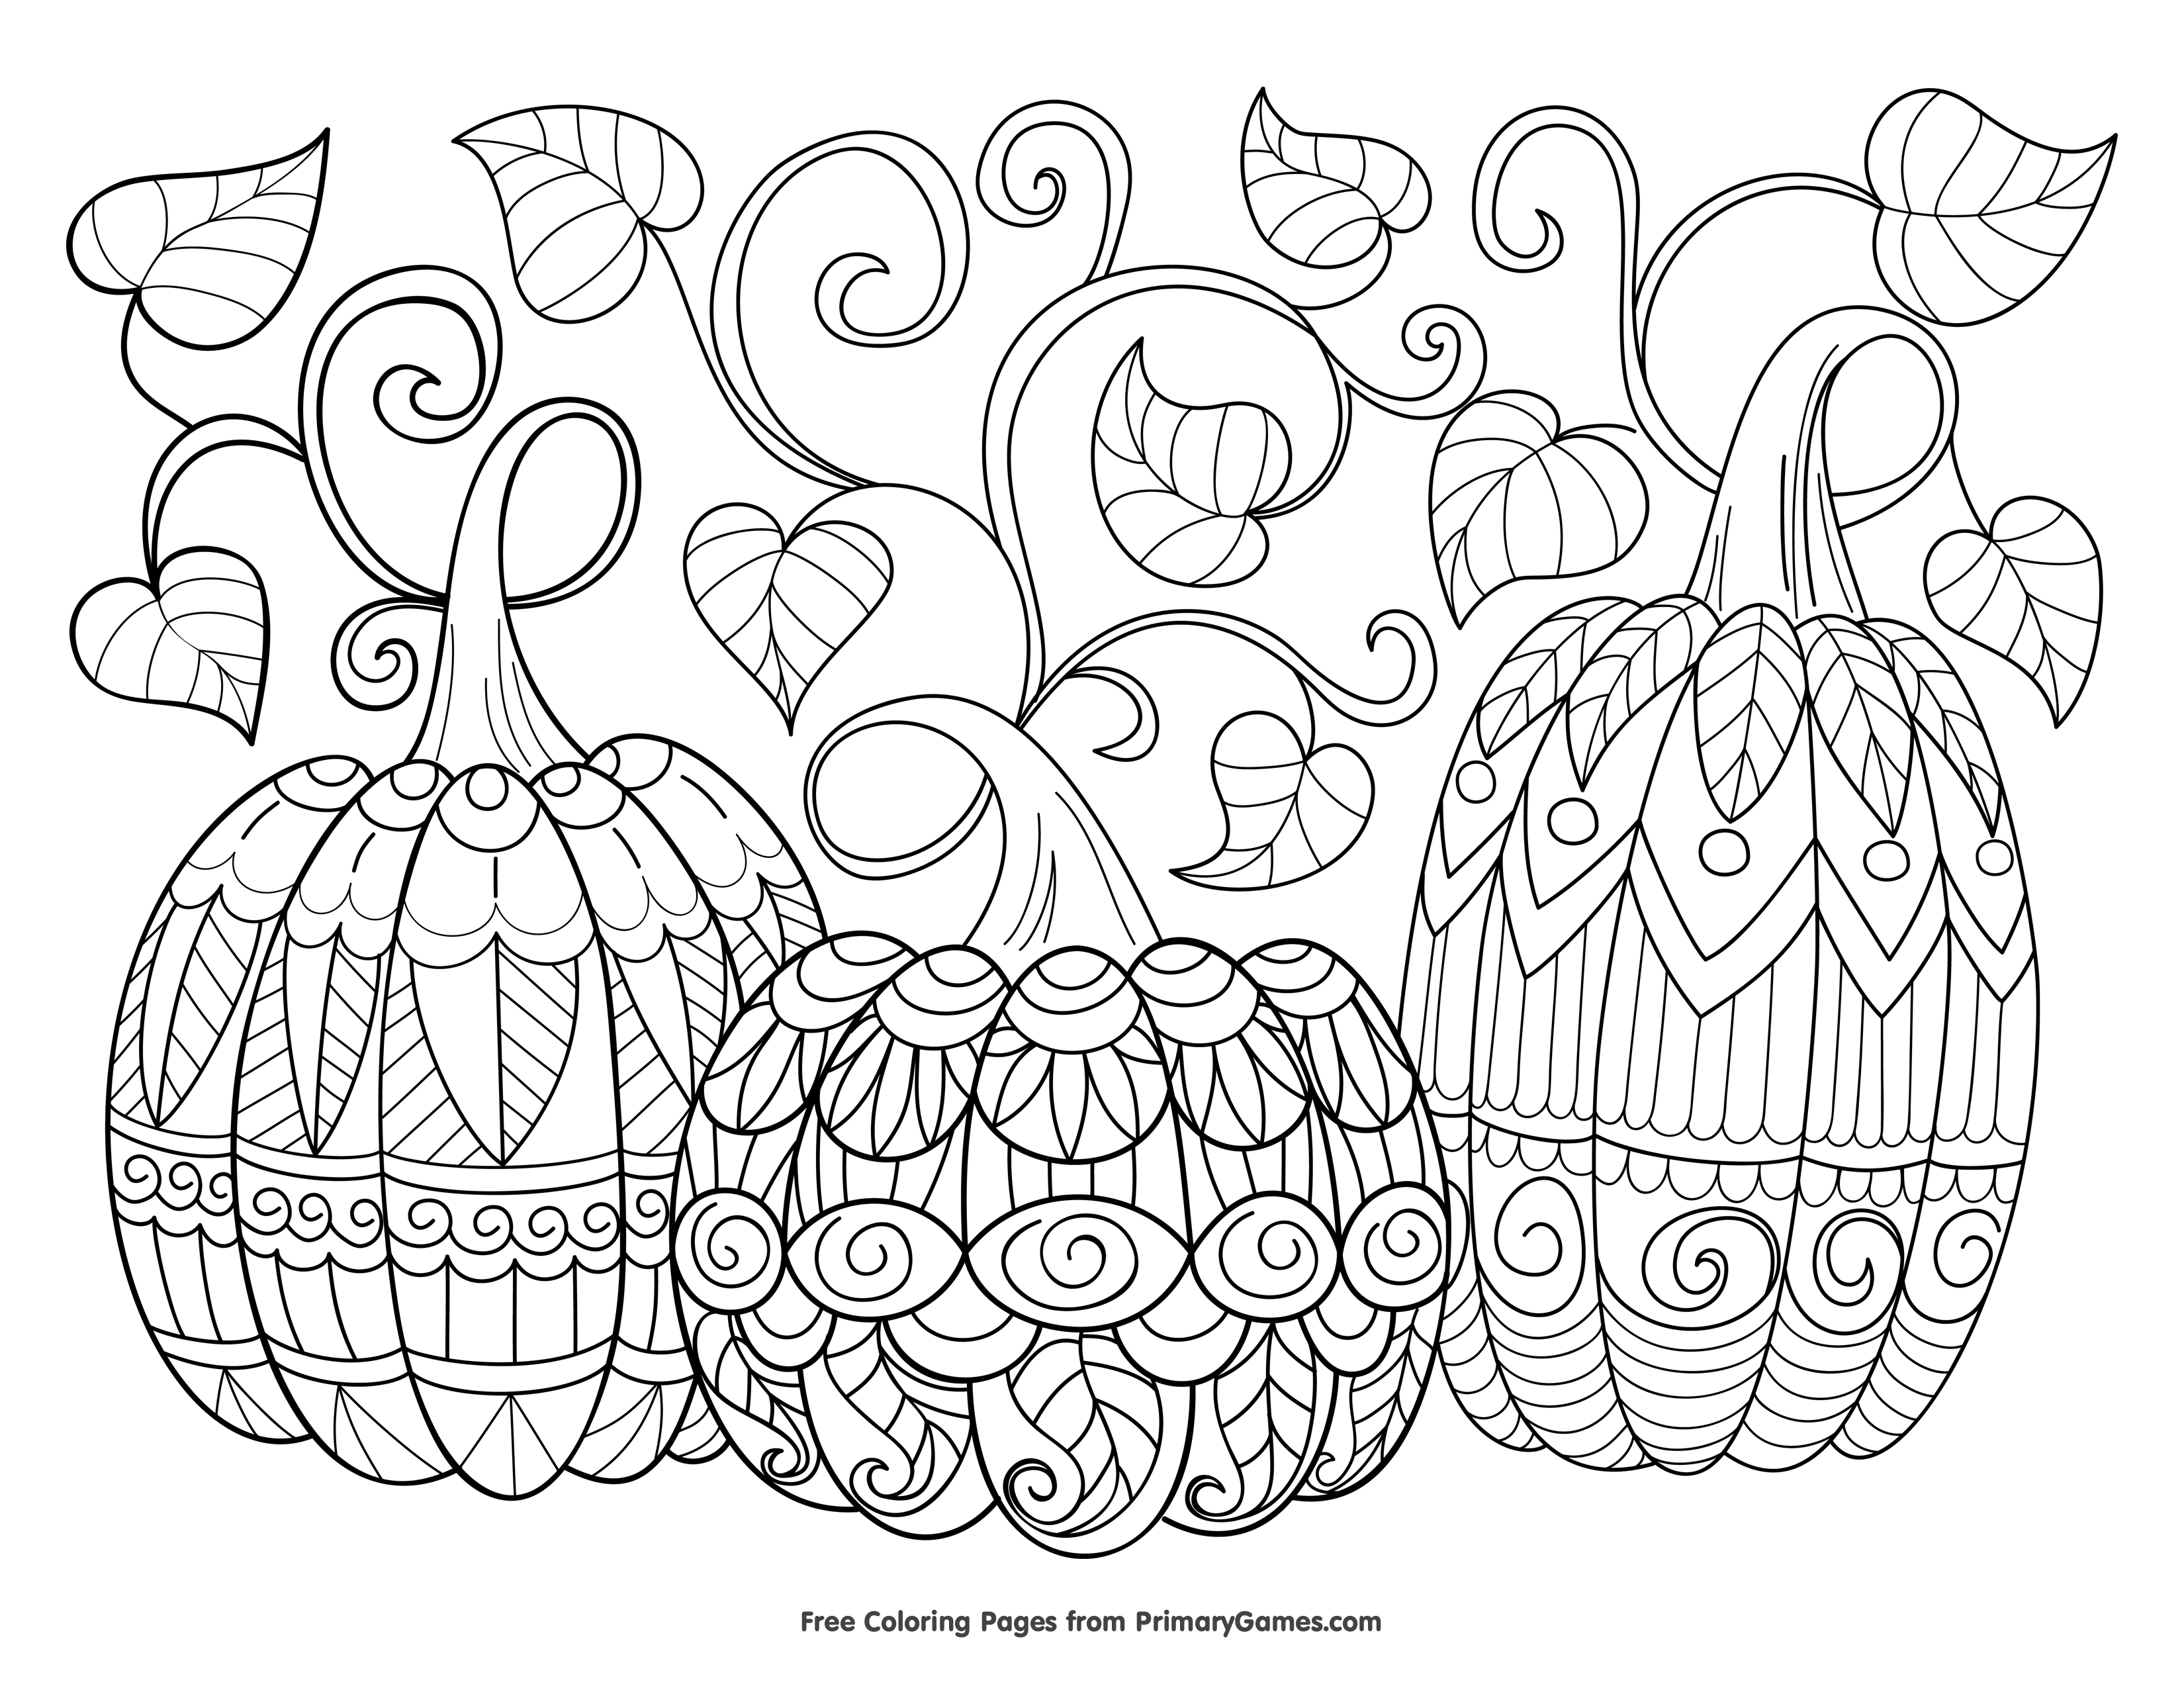 Download FREE Halloween Coloring Pages for Adults & Kids ...